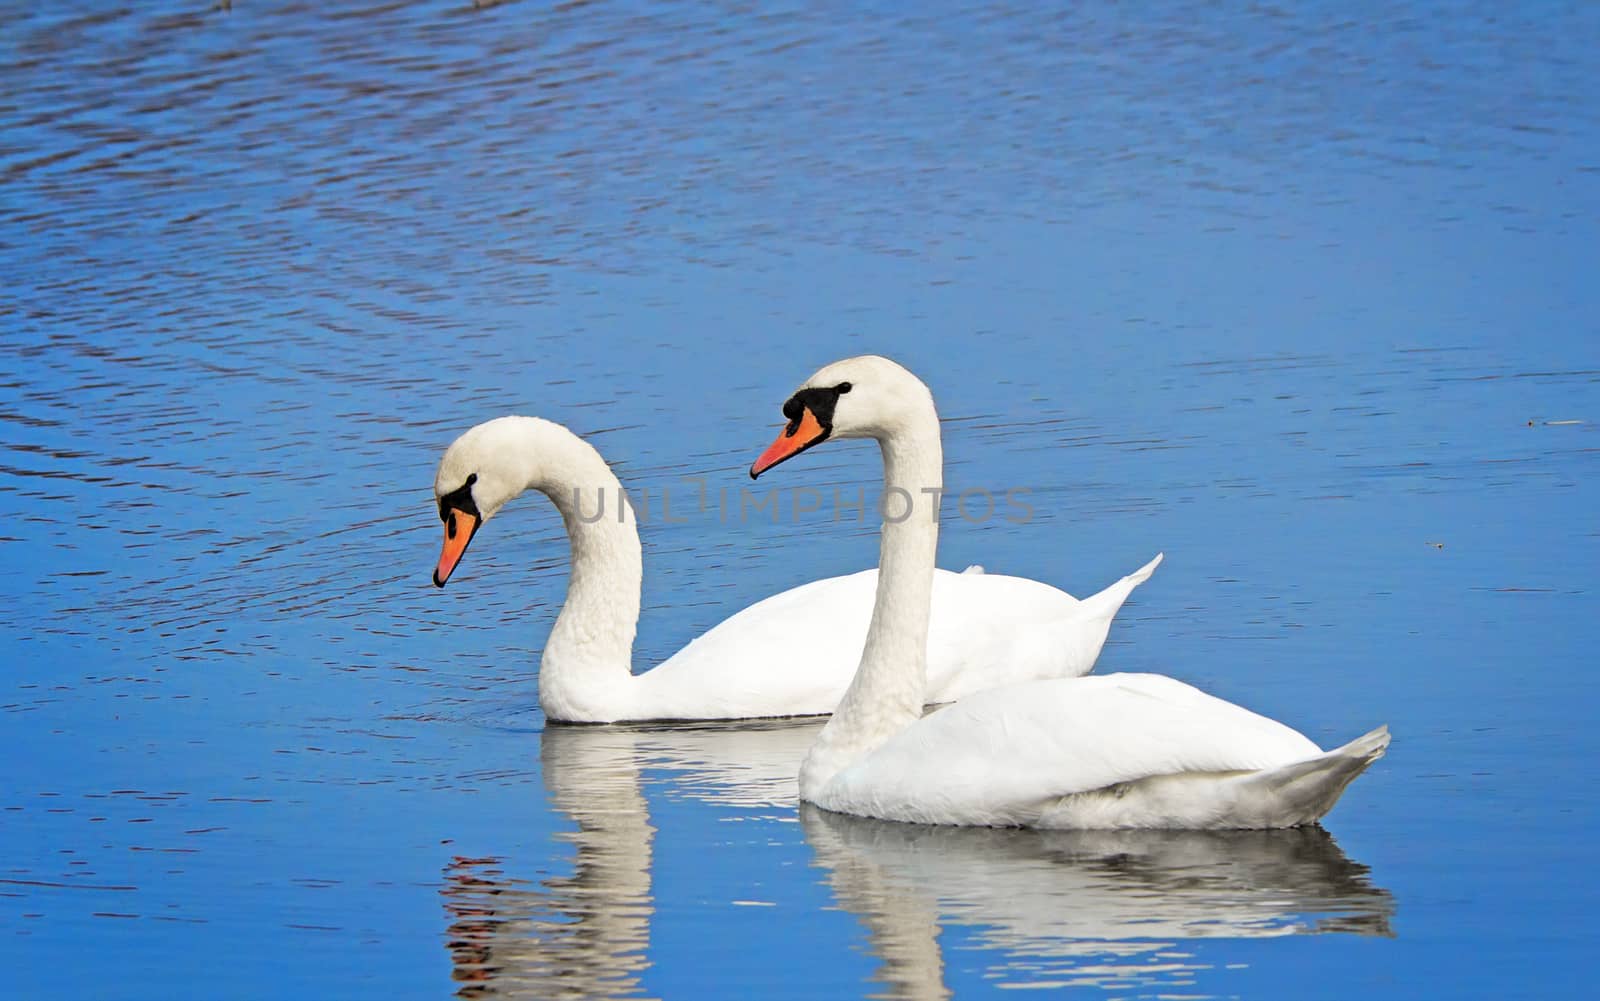 Two white swans on the lake surface. by georgina198